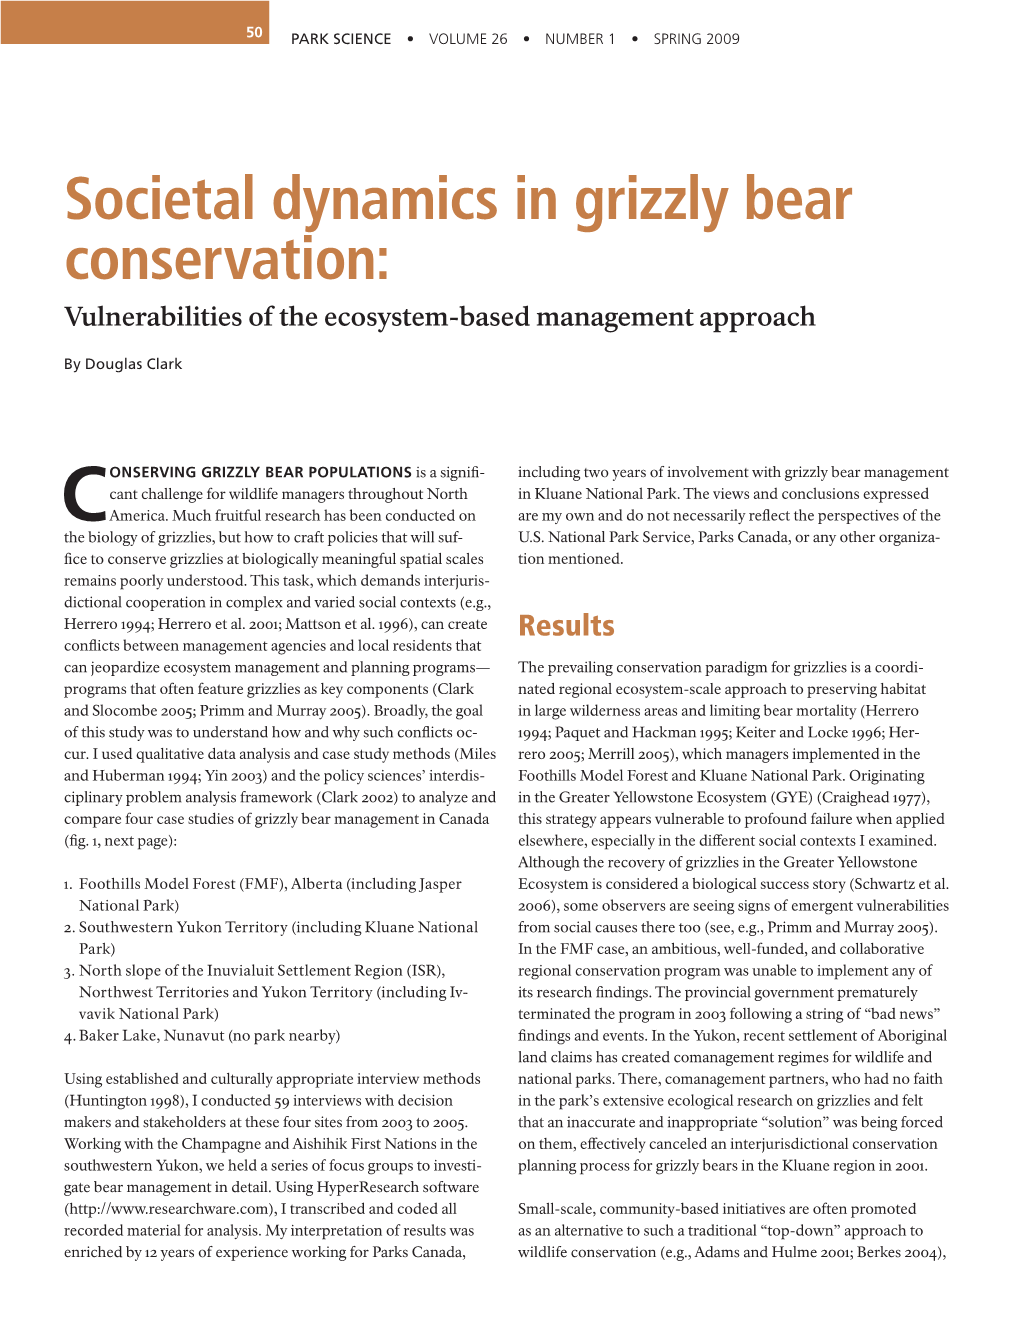 Societal Dynamics in Grizzly Bear Conservation: Vulnerabilities of the Ecosystem-Based Management Approach